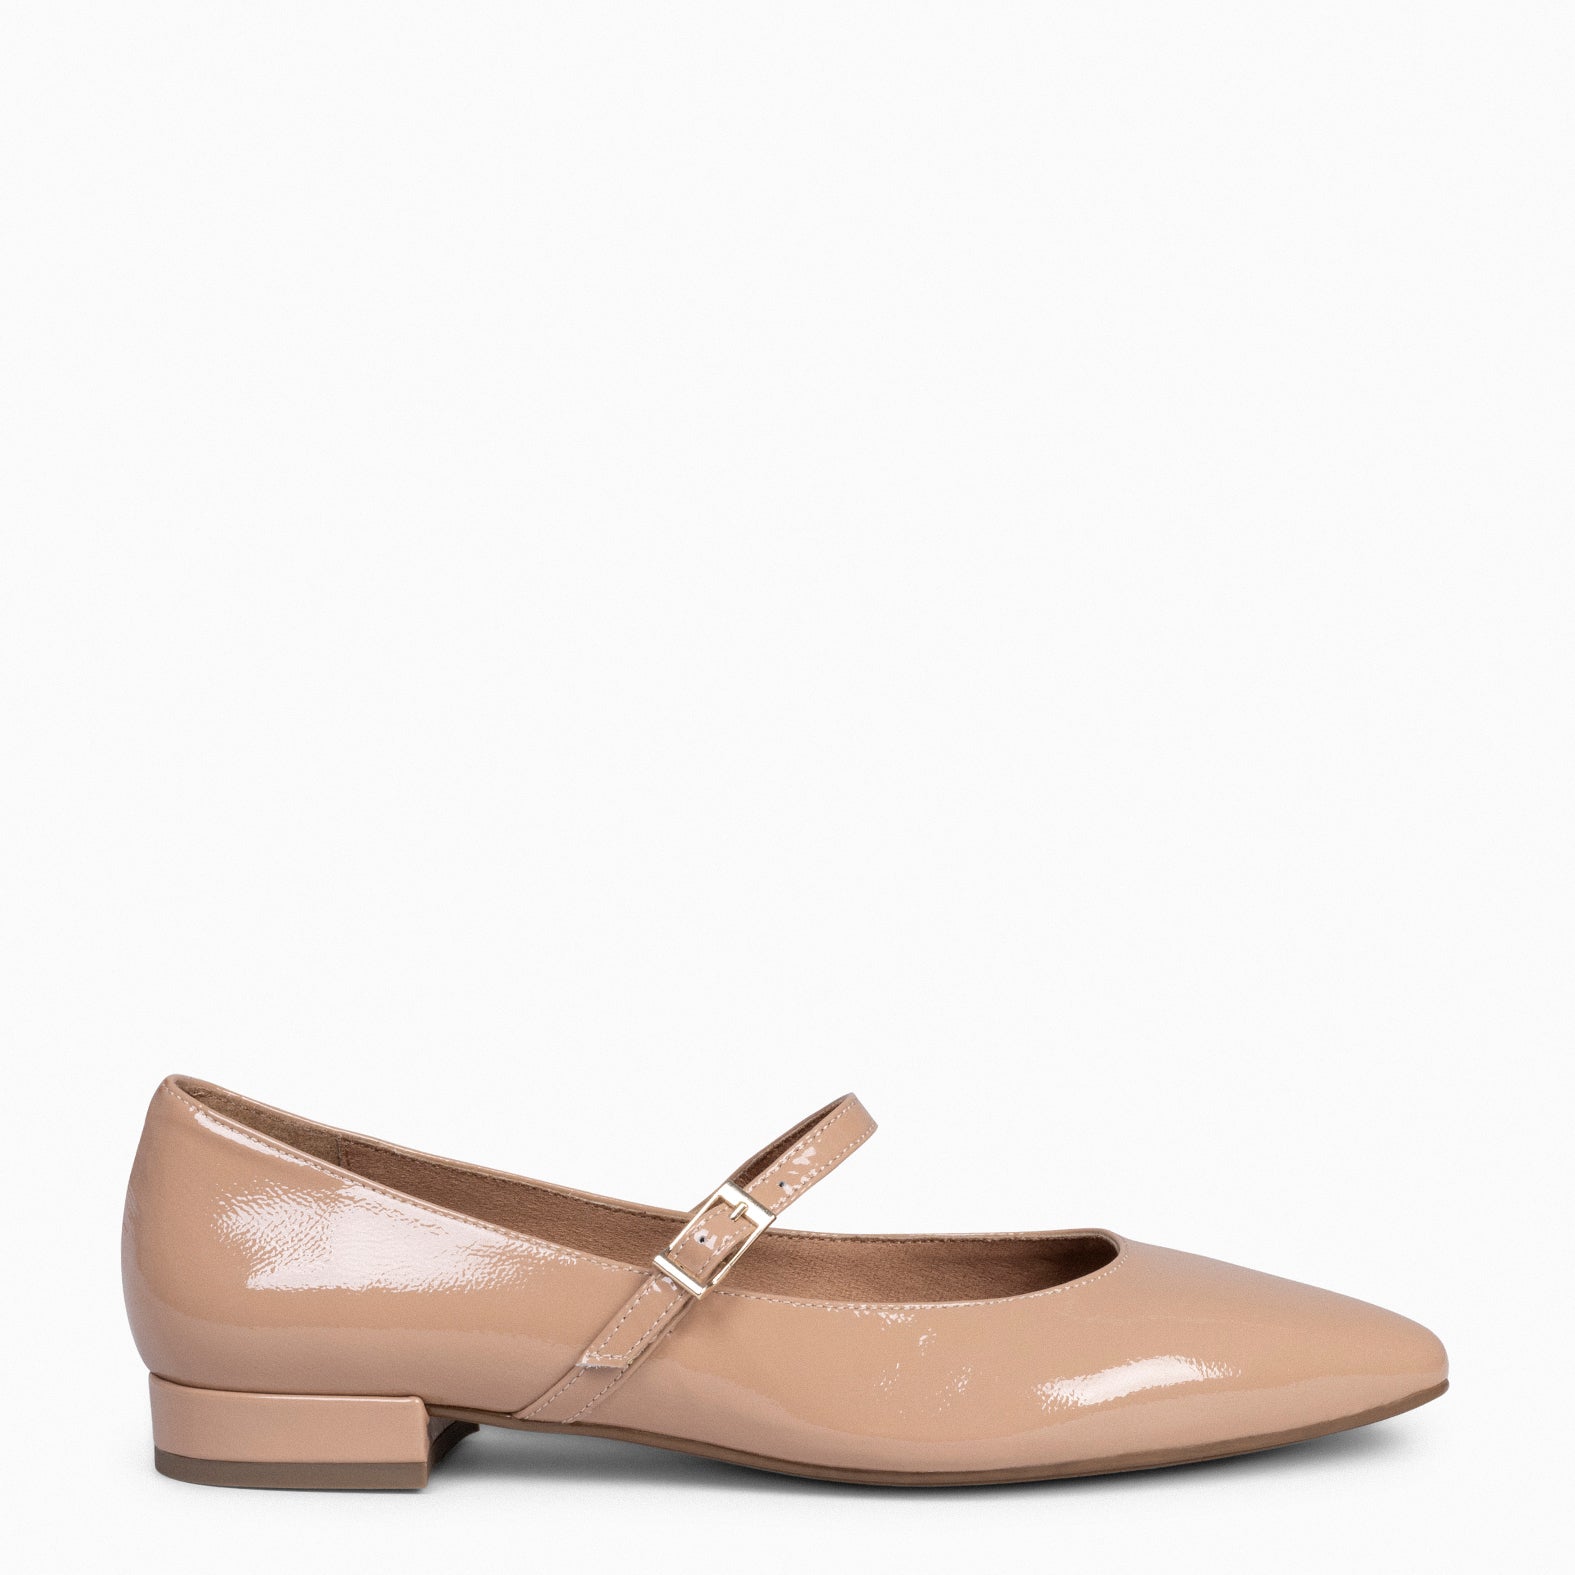 MARY JANE - NUDE Flat patent leather shoes with buckle